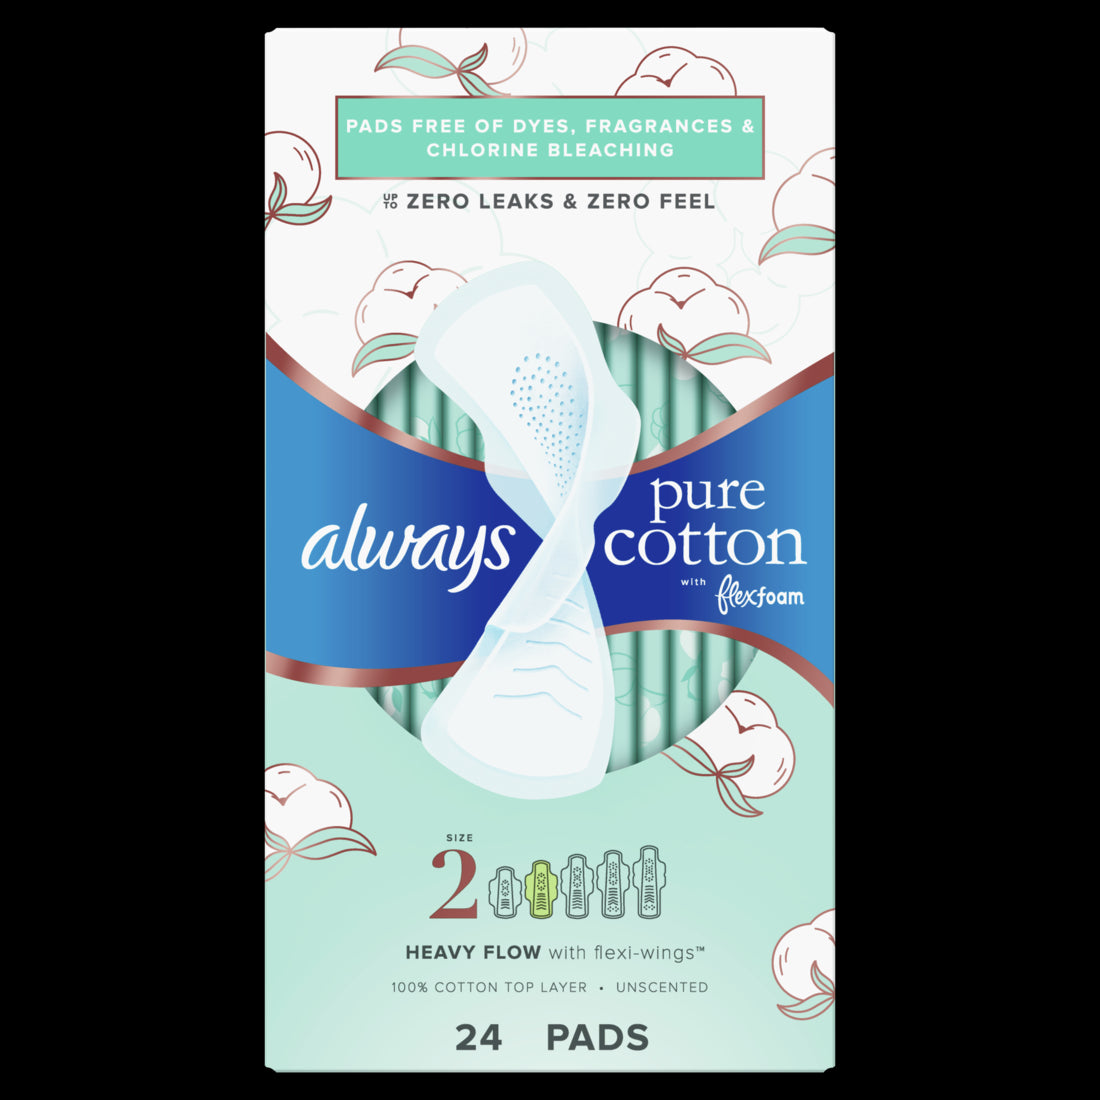 Always Pure Cotton Feminine Pads for Women Size 5 with wings Unscented